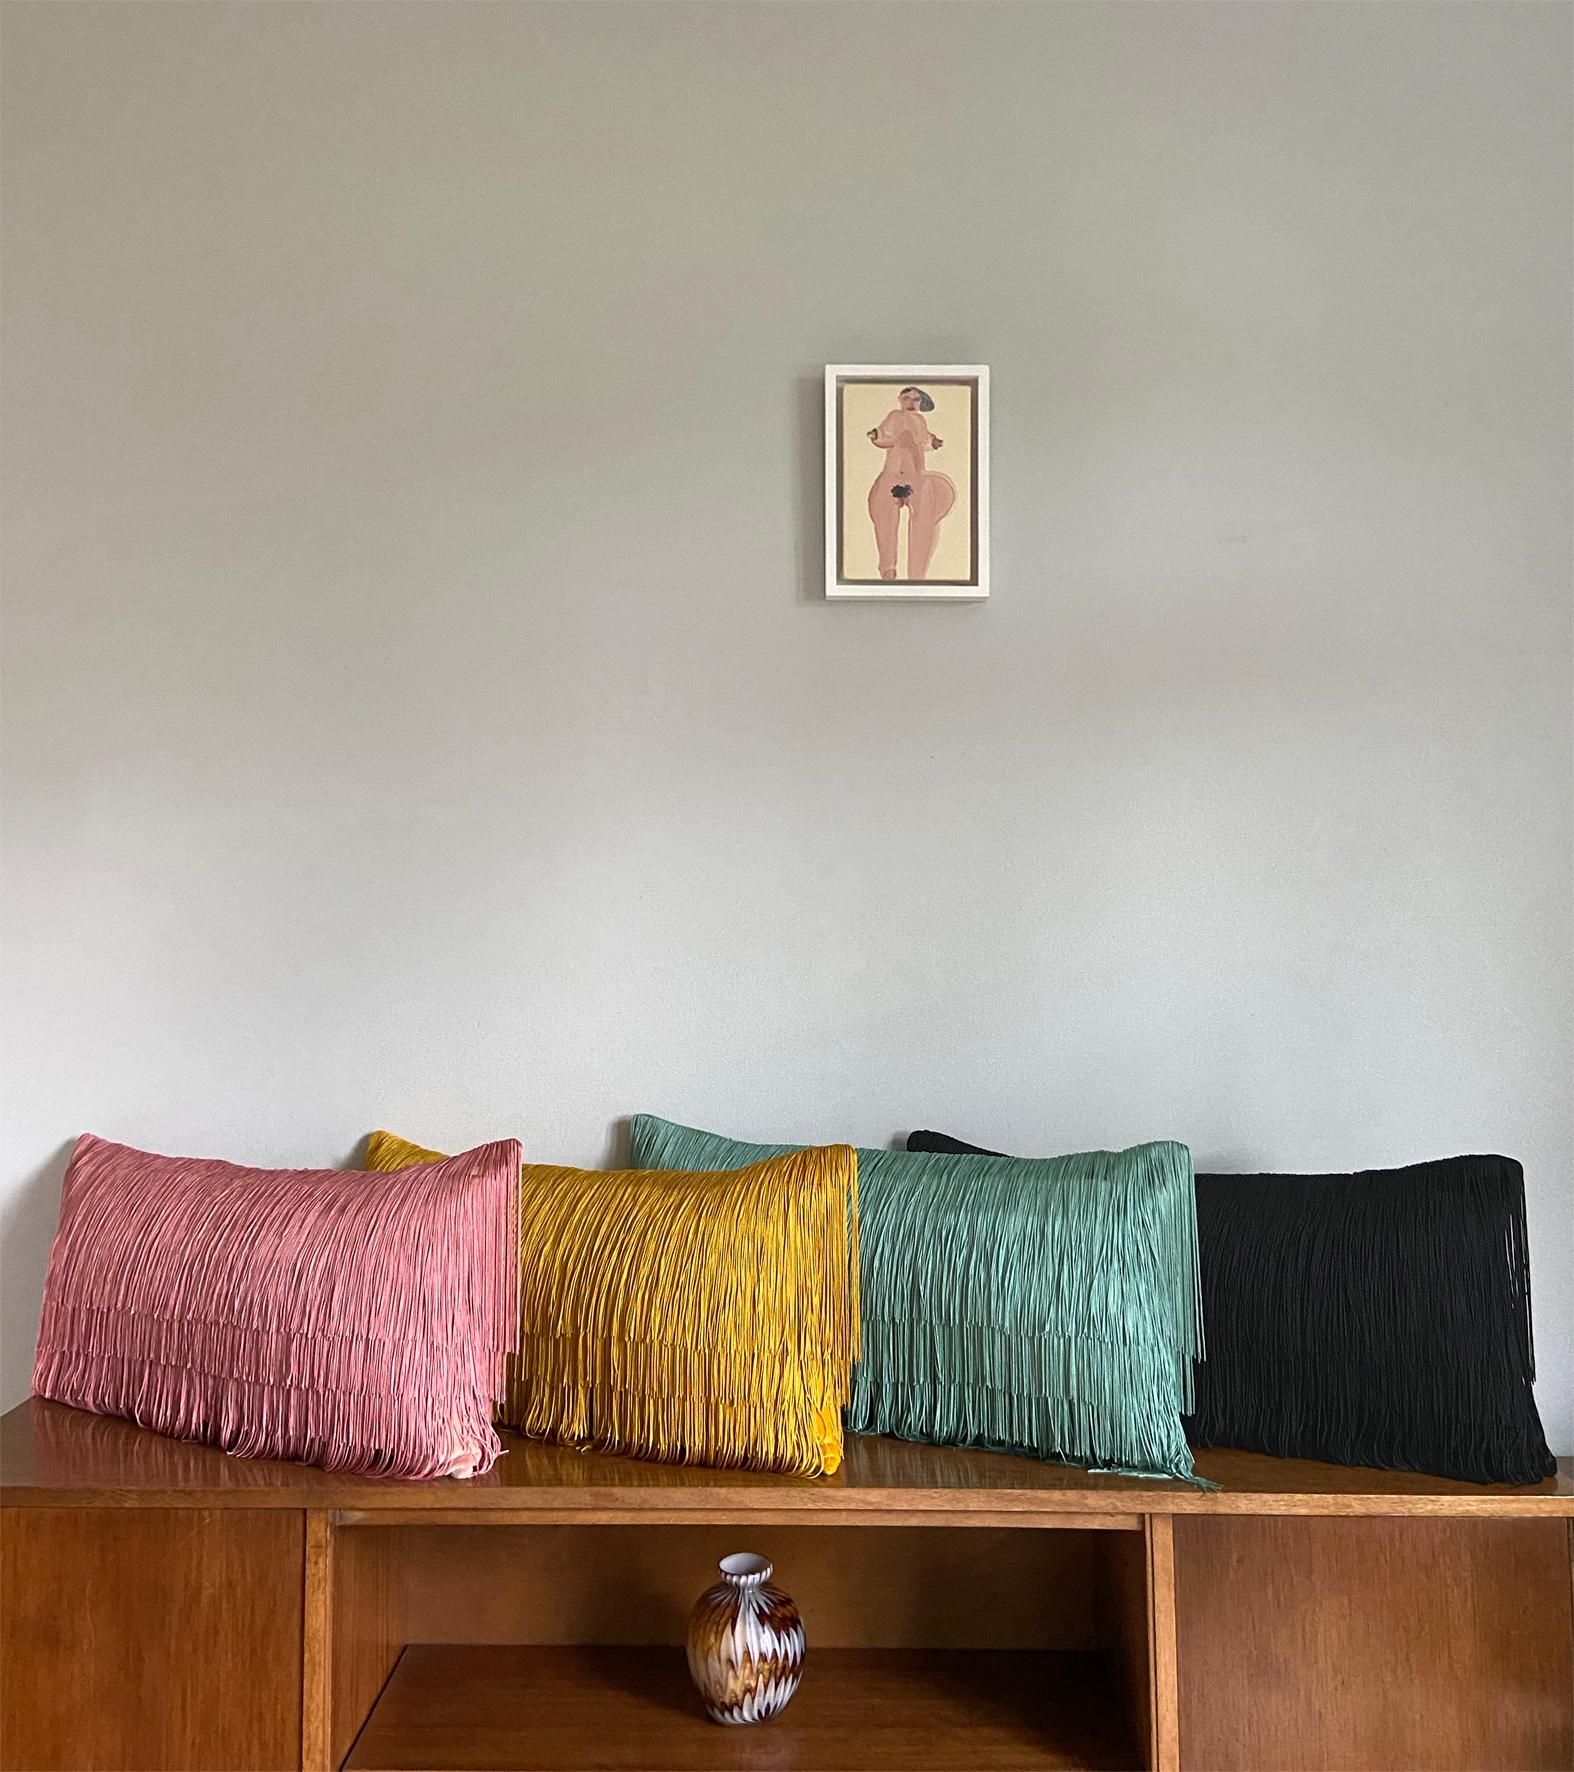 In a sumptuous ochre-gold hue, our signature velvet tassel cushion will make the ultimate decorative statement in your home. Whether you’re a maximalist adding to your many layers of décor or a minimalist wanting to make an impact this cushion does